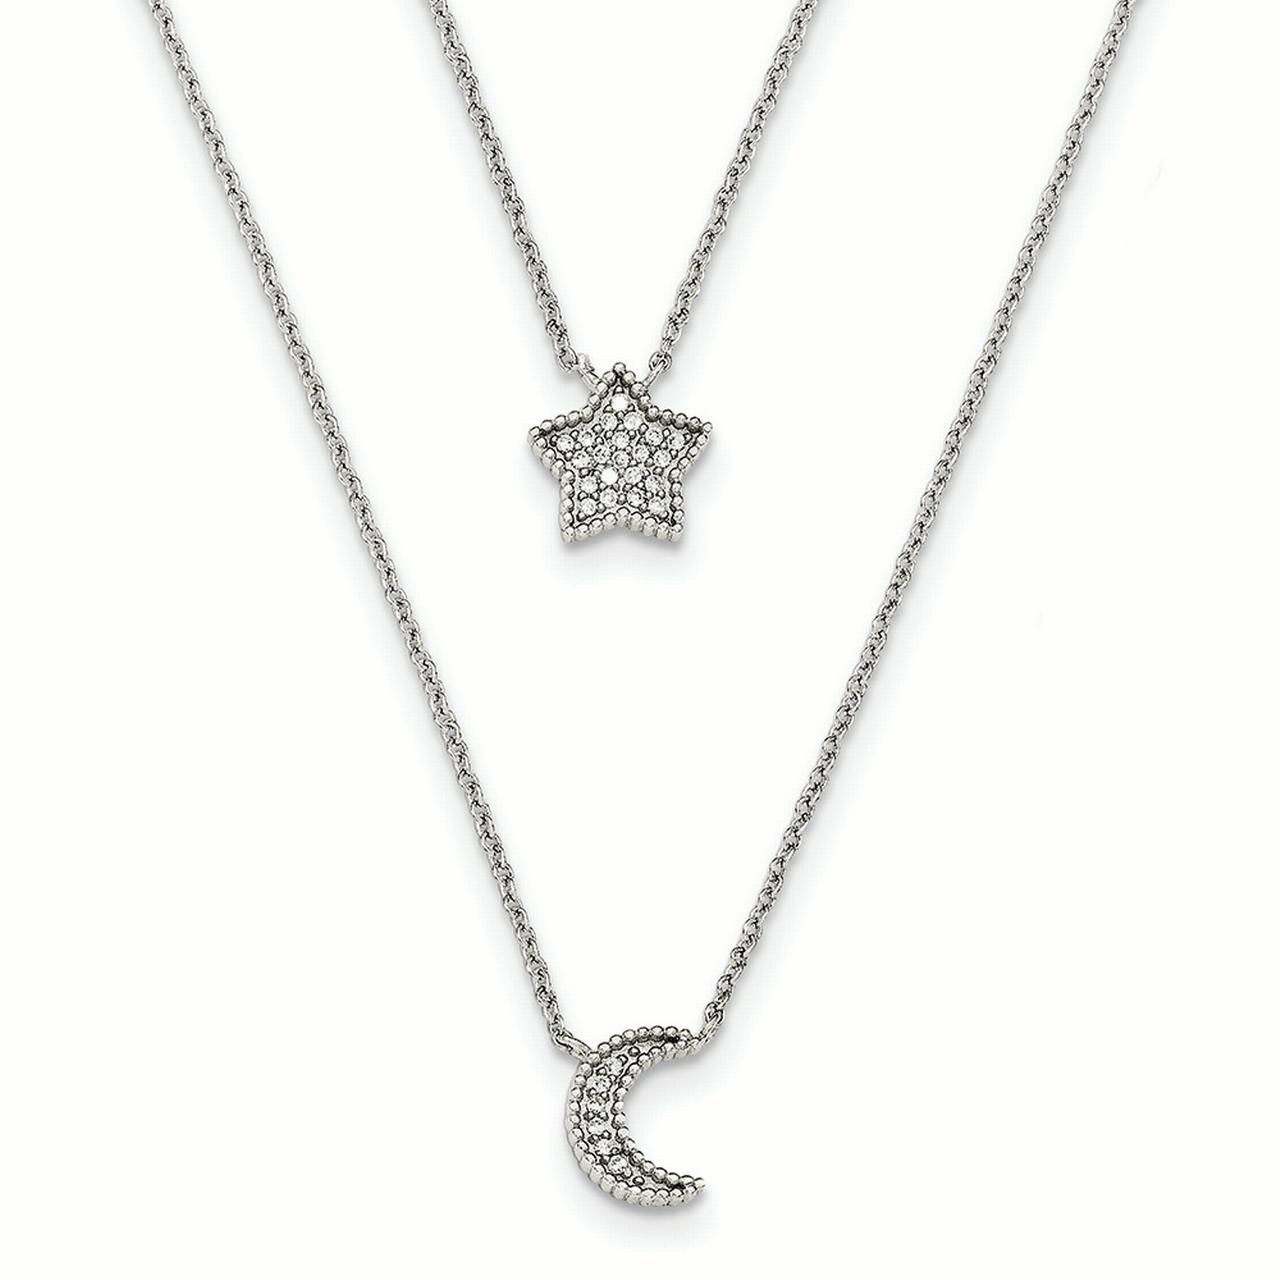 Sterling Silver Polished Cz Moon And Star Double Strand Necklace, 16" Regarding Newest Polished Moon & Star Pendant Necklaces (View 9 of 25)